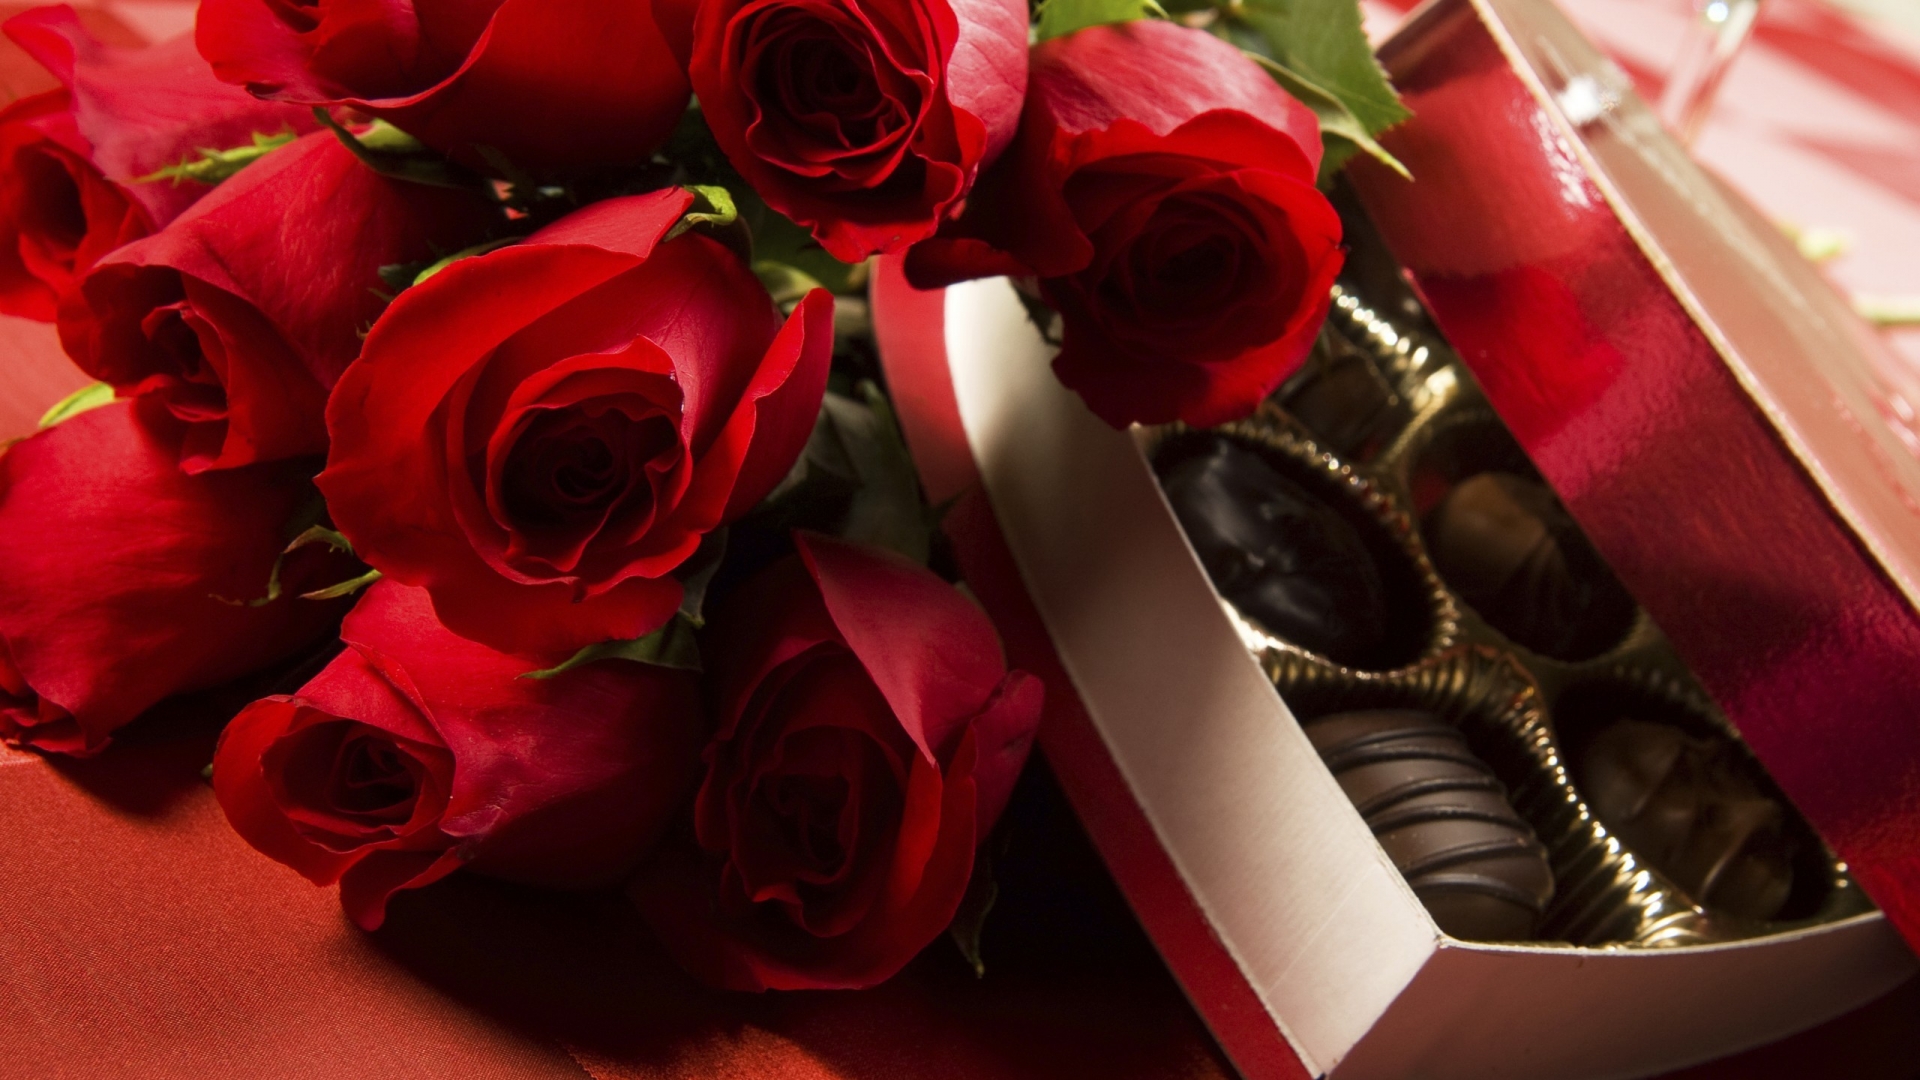 Roses And Chocolate for 1920 x 1080 HDTV 1080p resolution